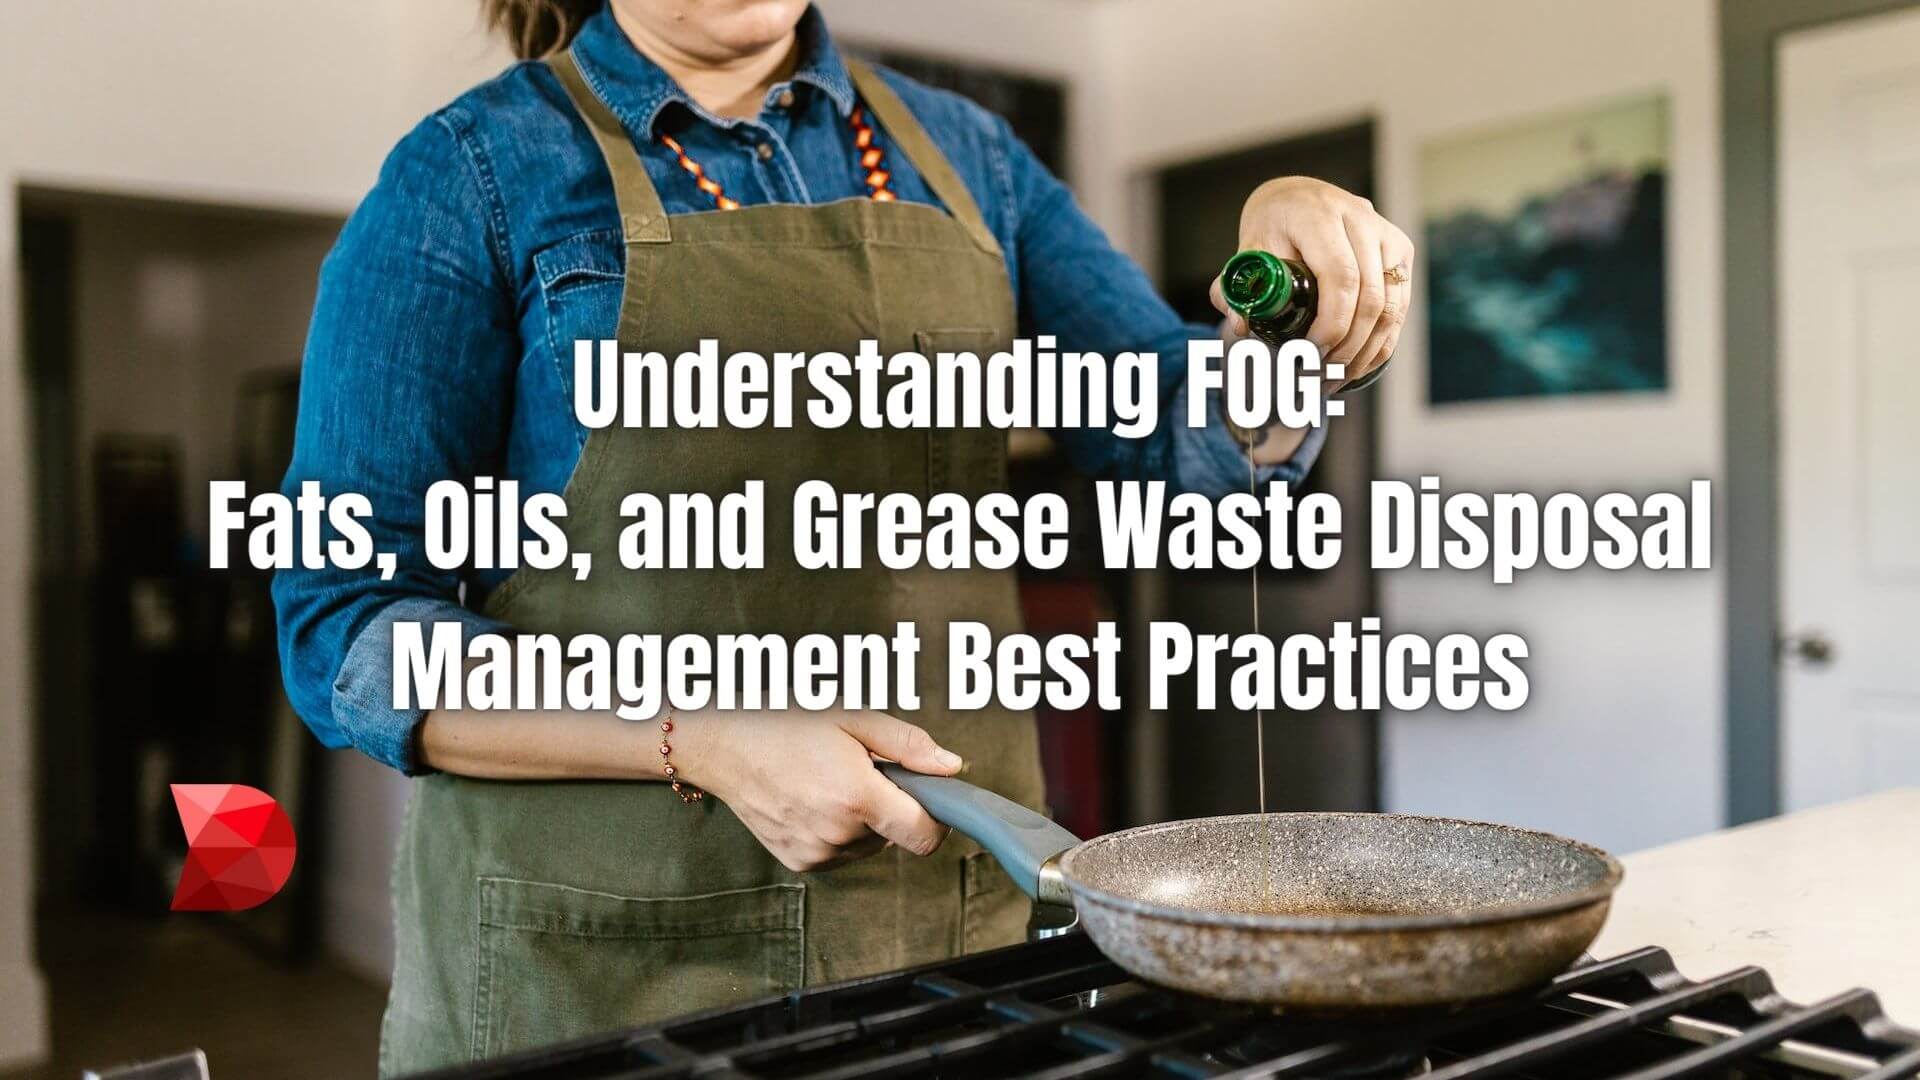 Discover expert tips for effective fats, oils, and grease waste disposal. Optimize your management practices with this comprehensive guide.